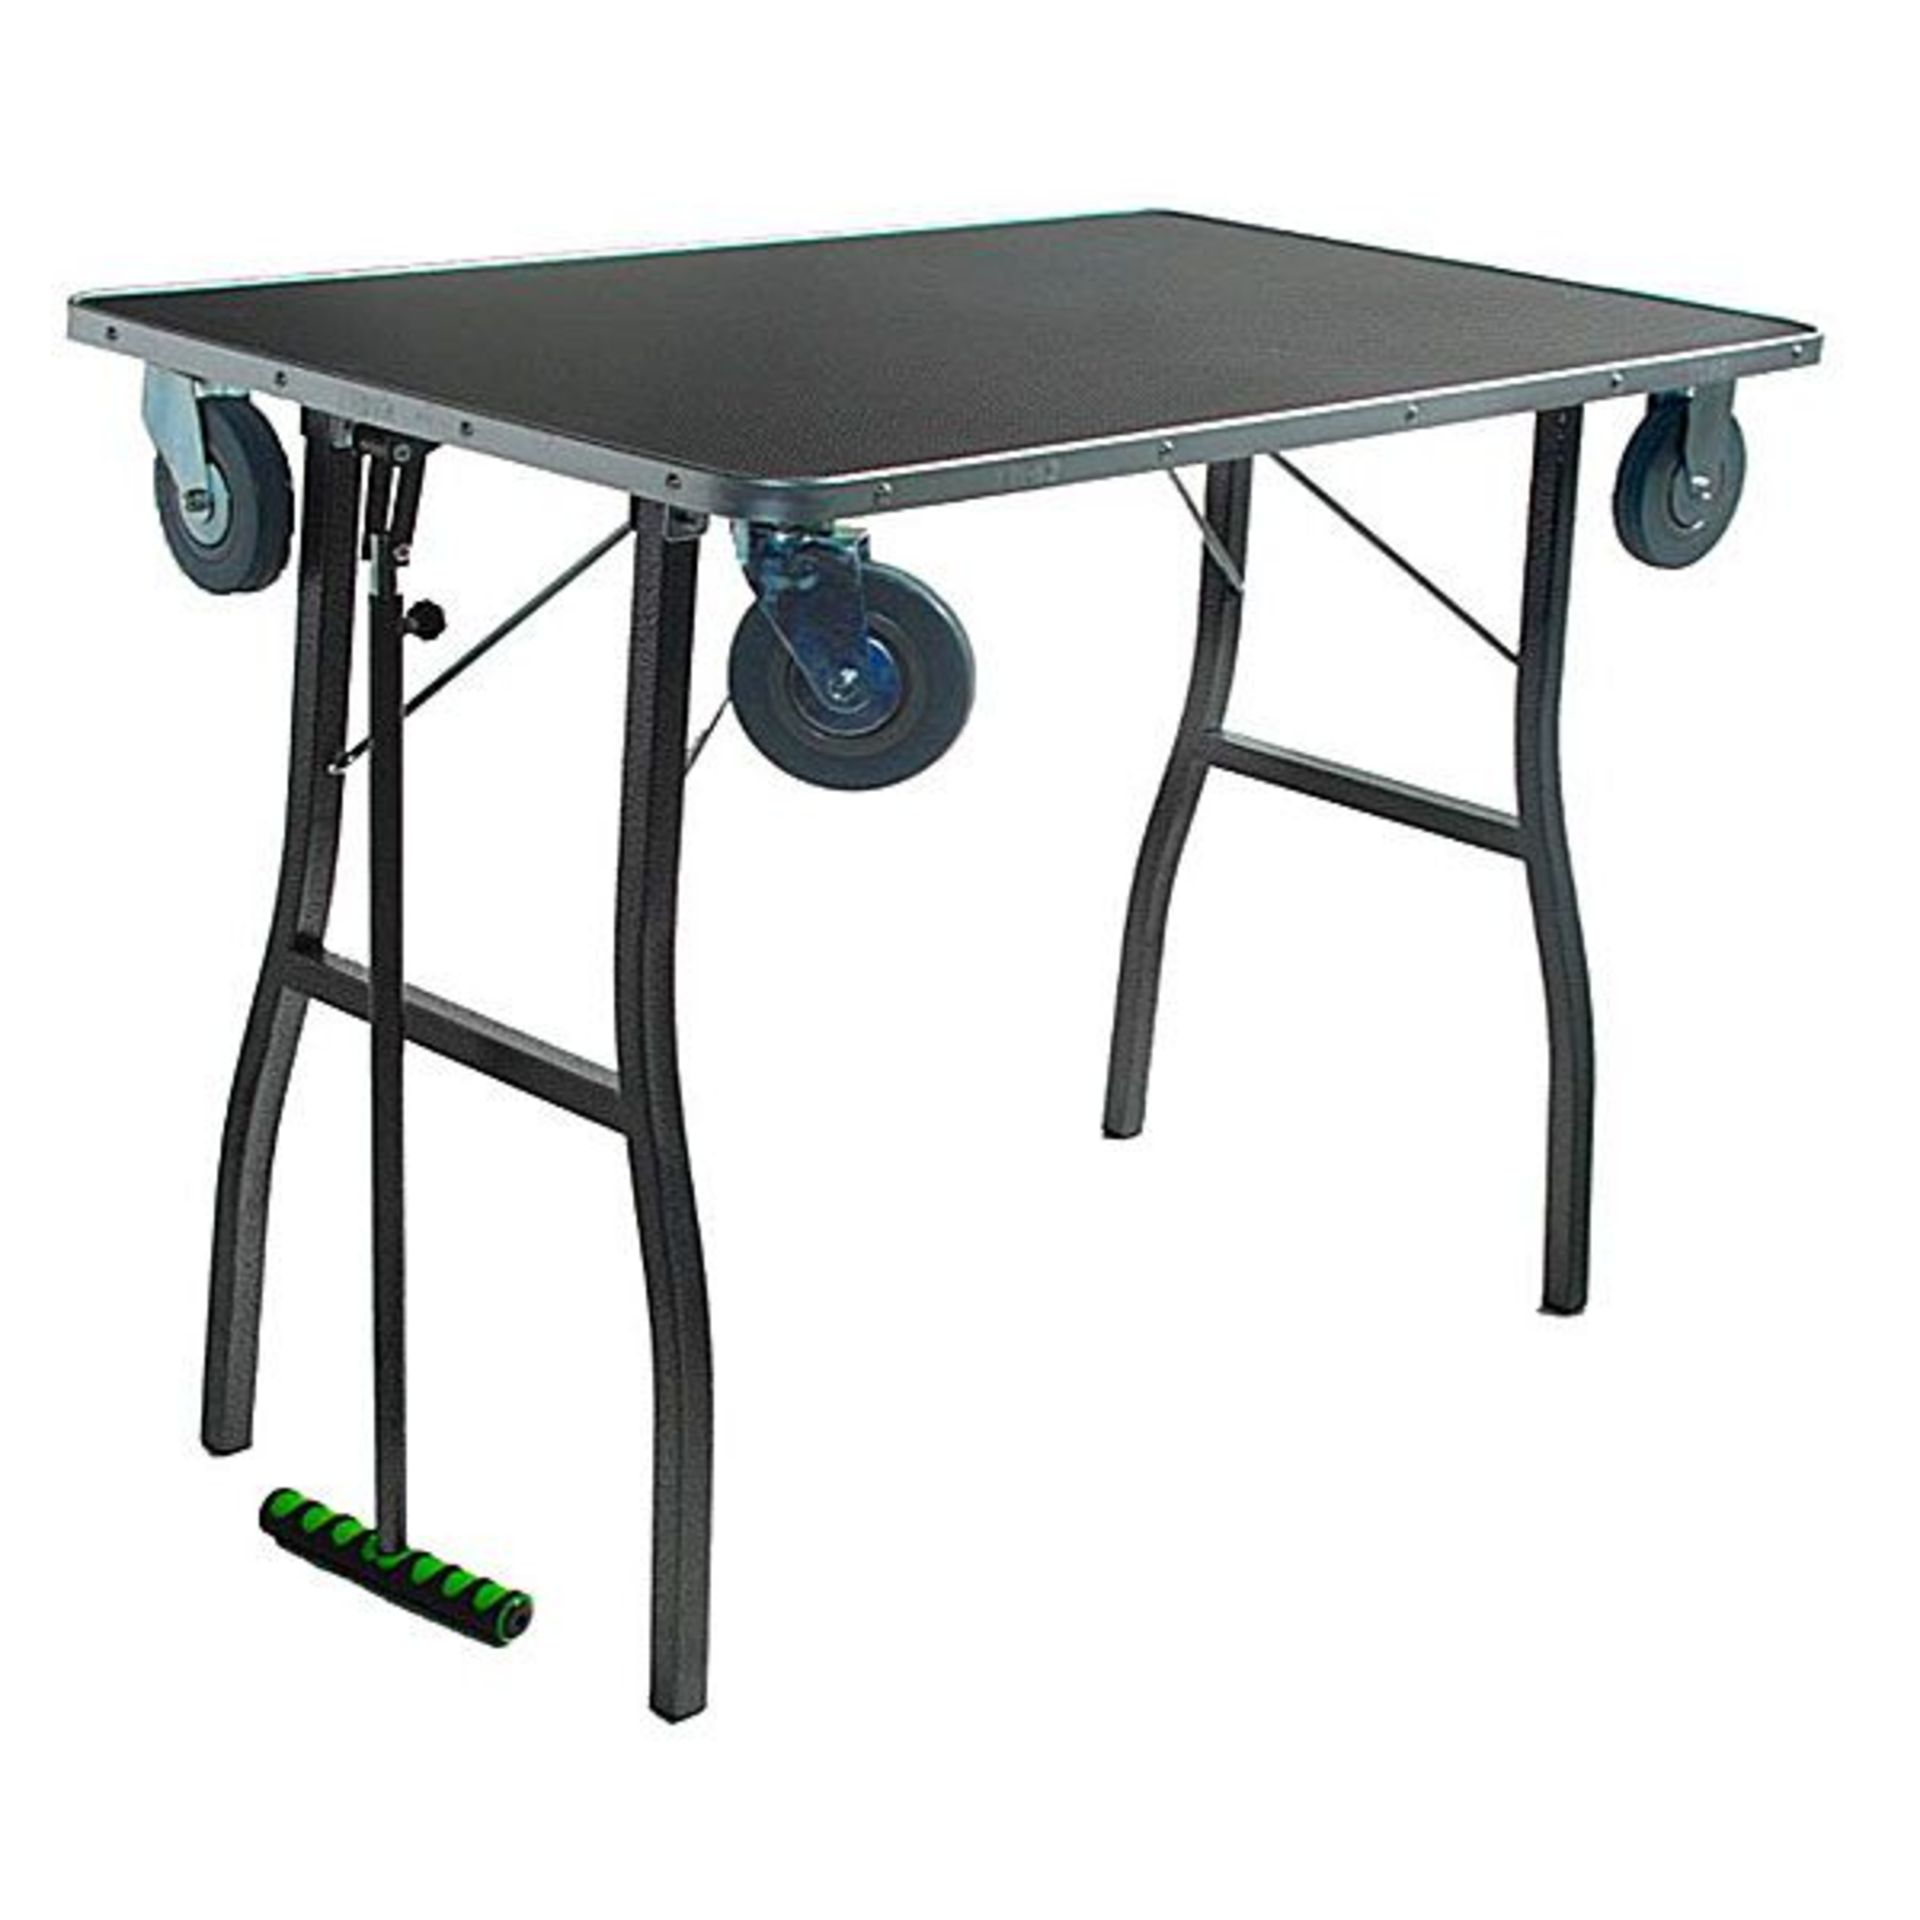 Table trolley for Dog Shows and Grooming | RRP £121.00